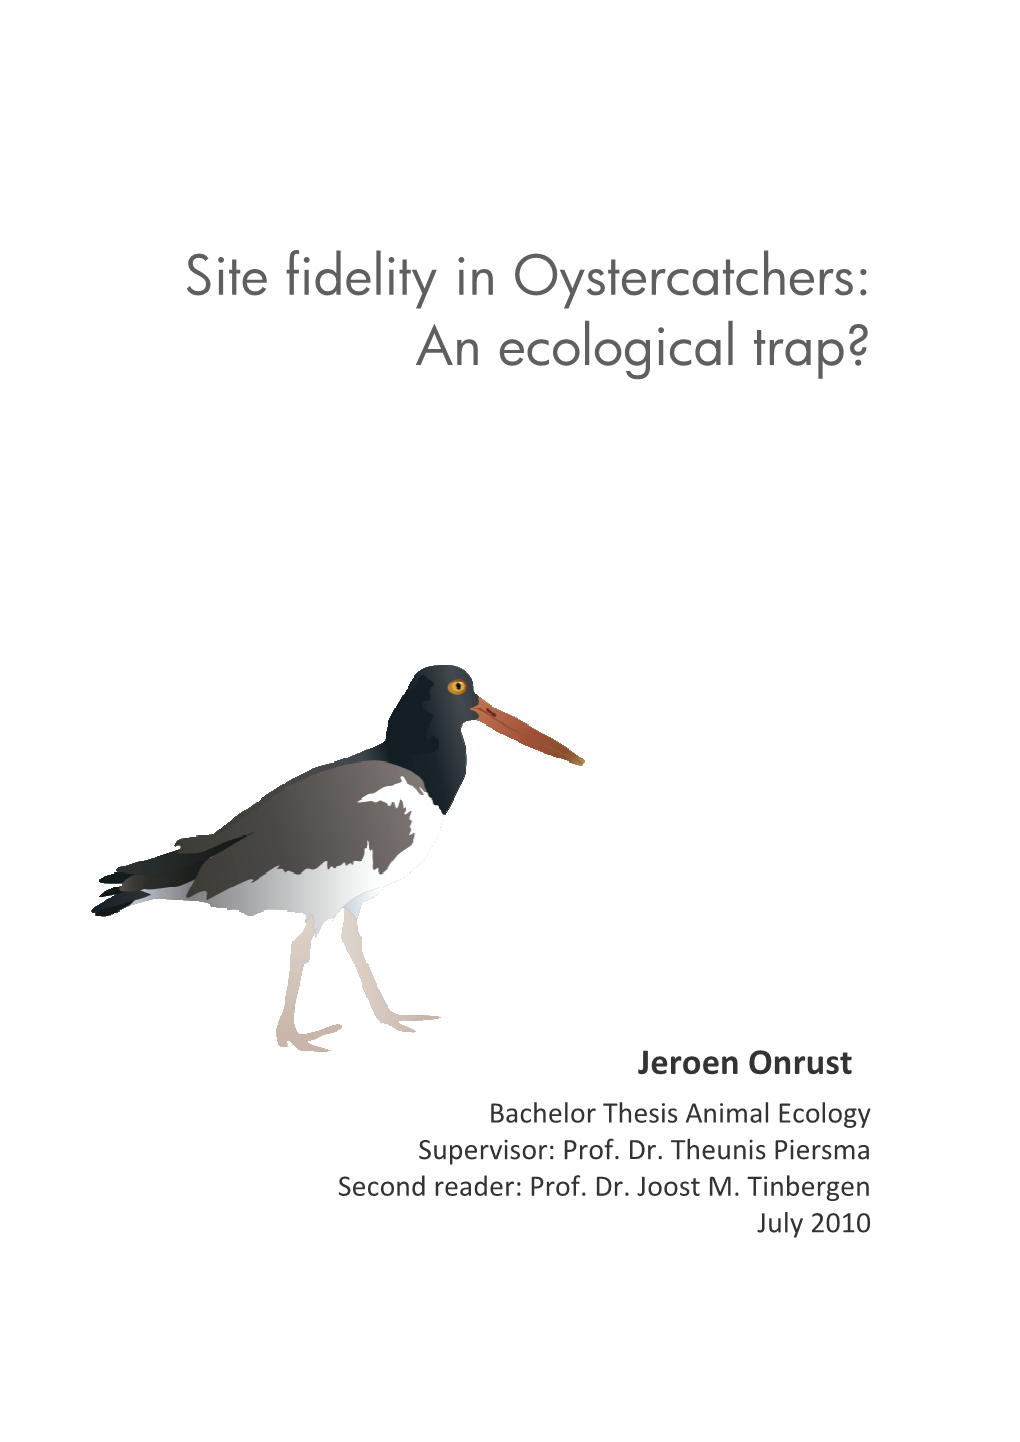 Site Fidelity in Oystercatchers: an Ecological Trap?